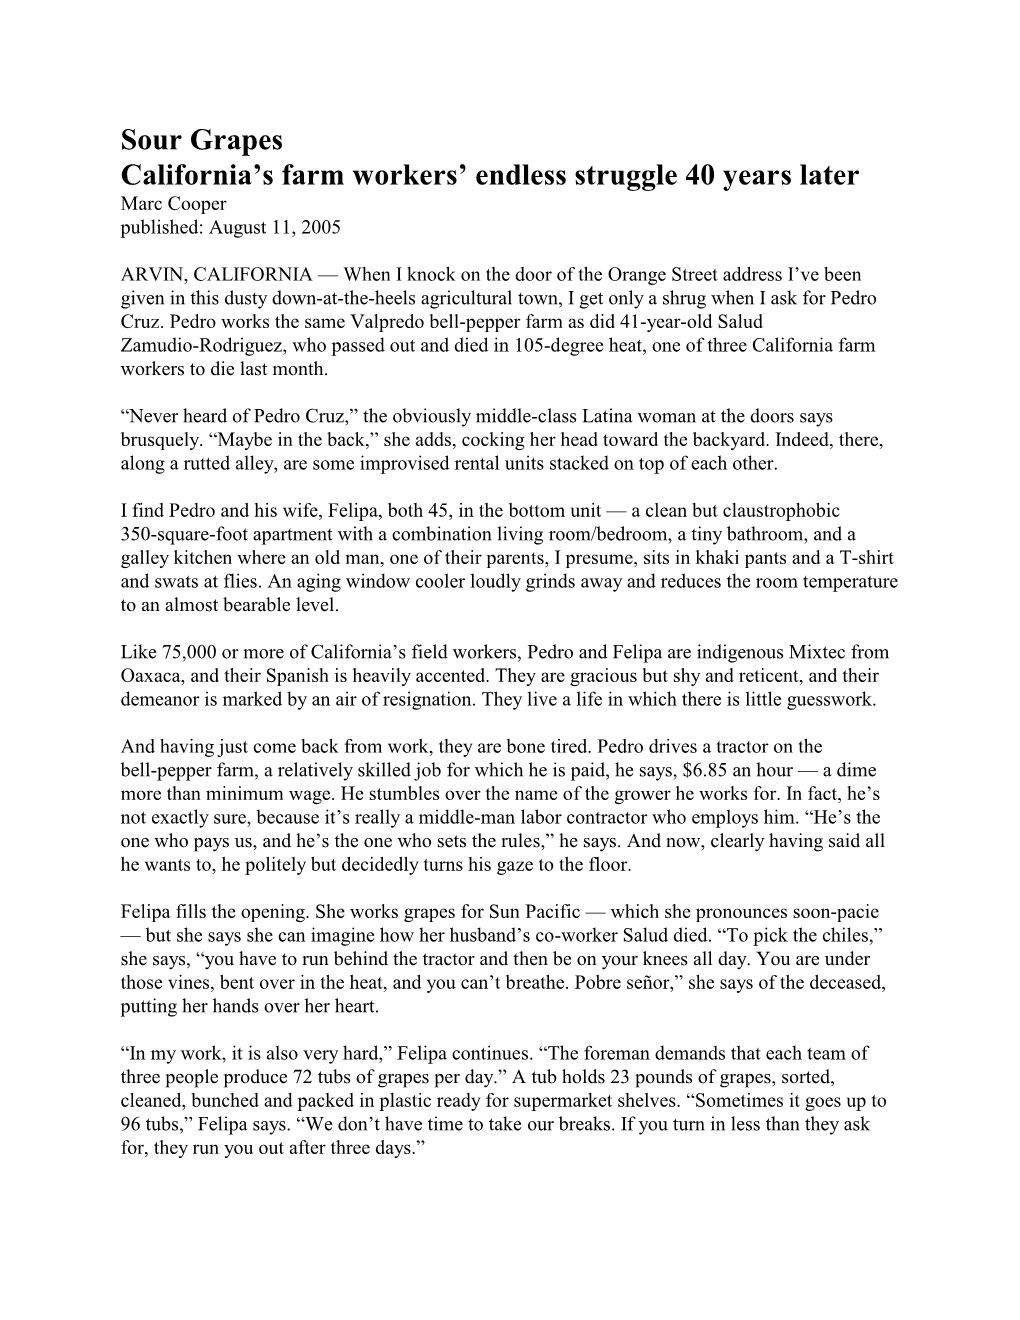 Sour Grapes California’S Farm Workers’ Endless Struggle 40 Years Later Marc Cooper Published: August 11, 2005